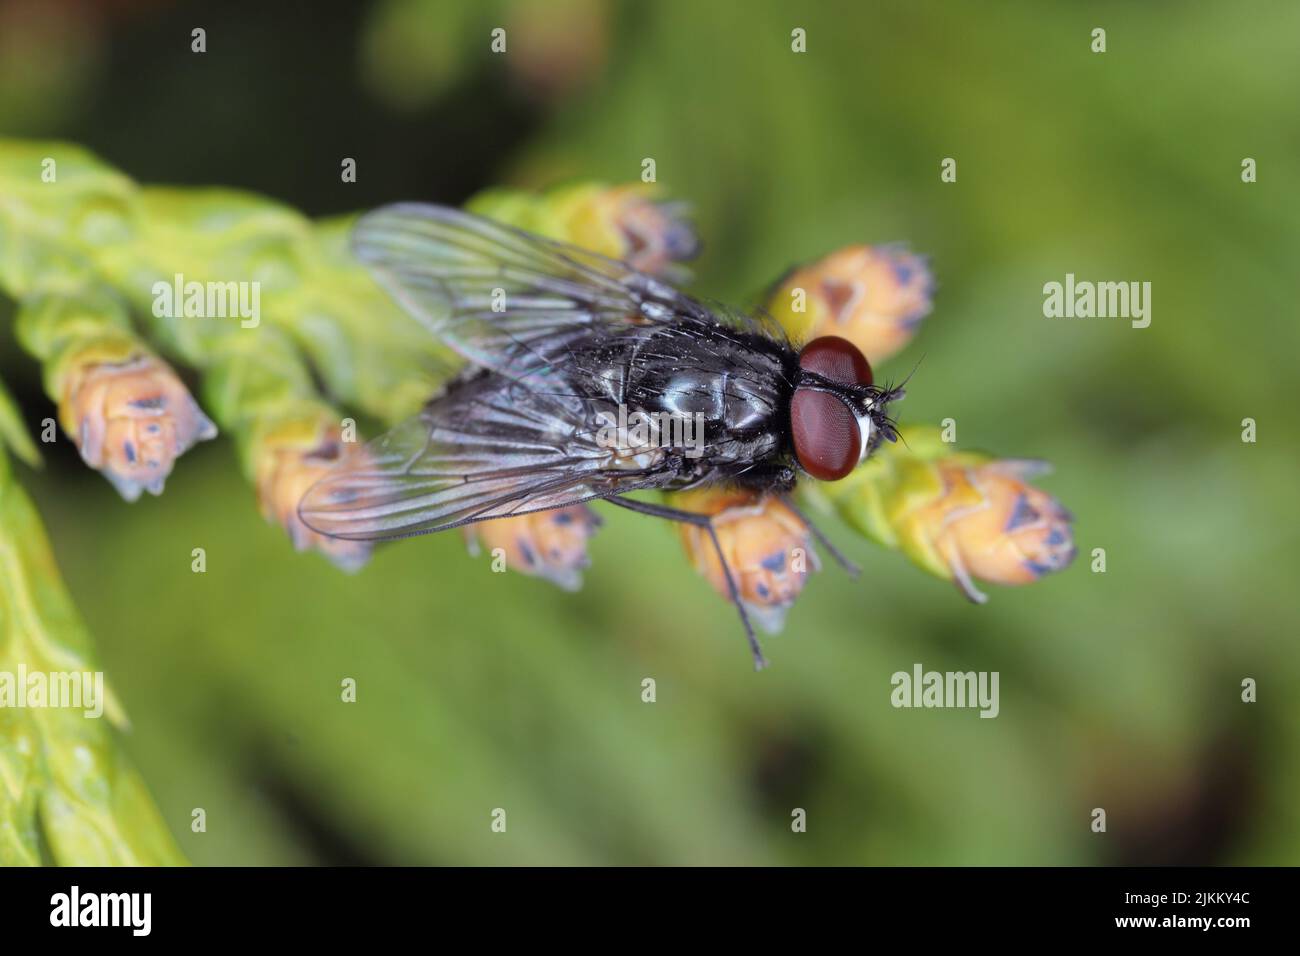 A fly sitting on a green plant. Stock Photo